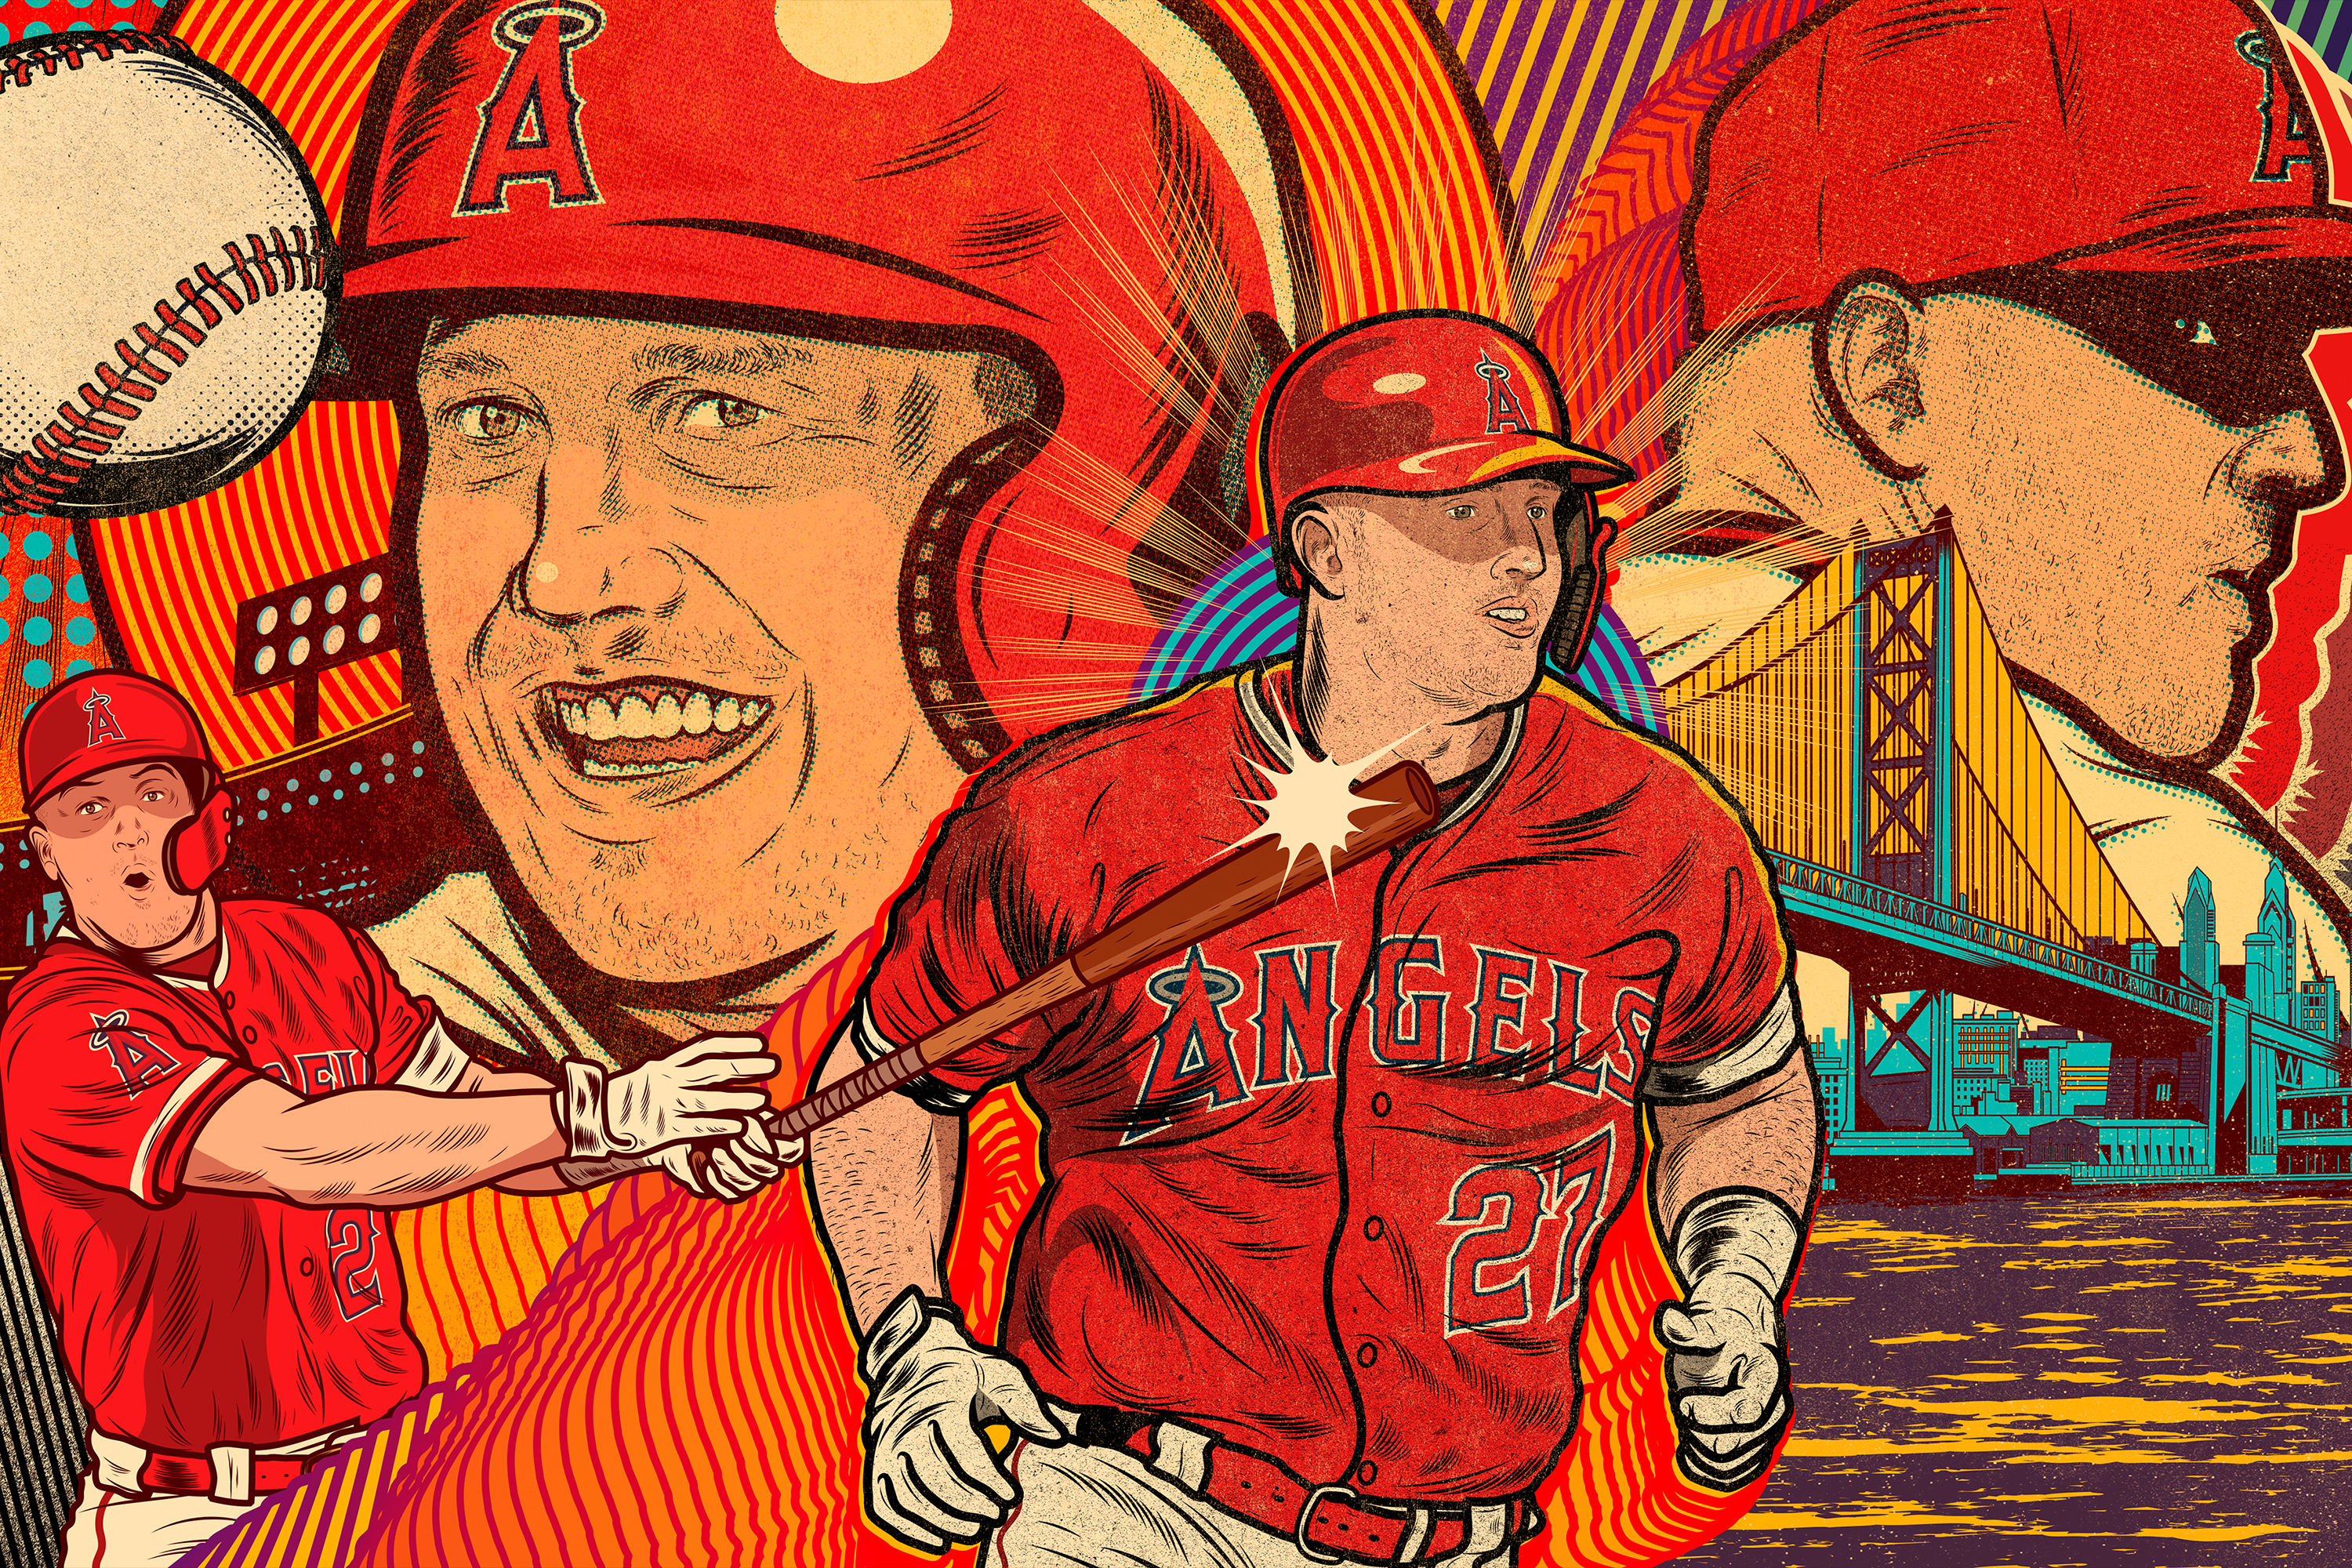 Mike Trout Is Built for Anaheim, but He Is Still Philly's Guy